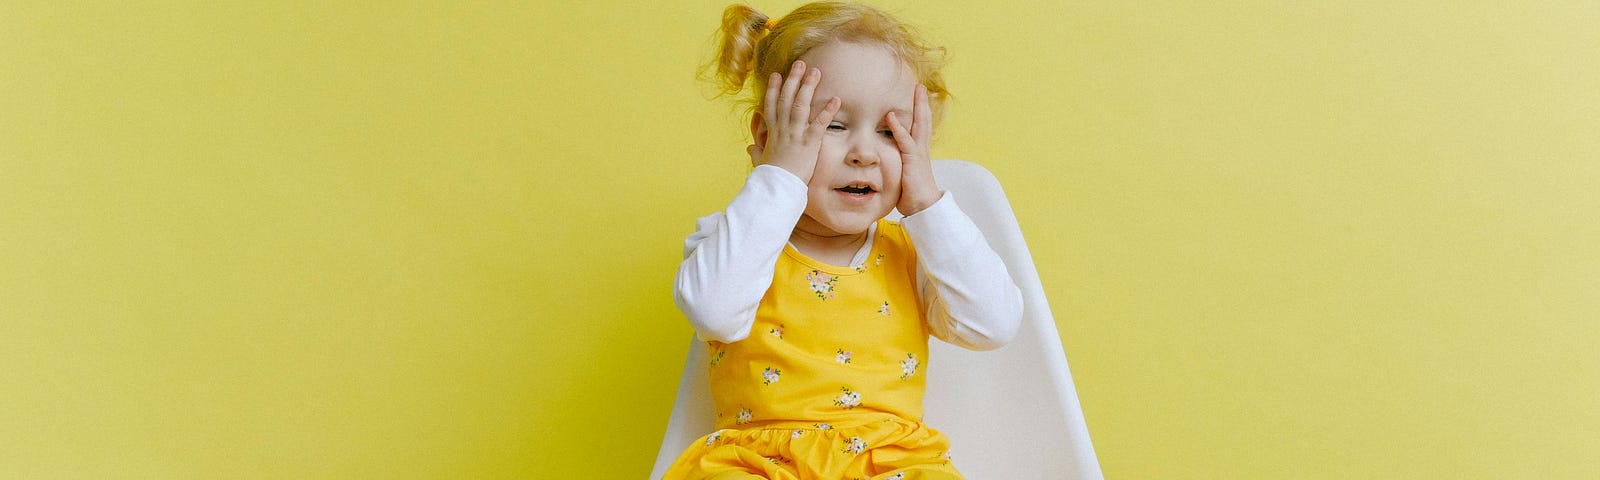 Little, blond girl sitting on a chair, yellow backdrop. Her hands on her face.